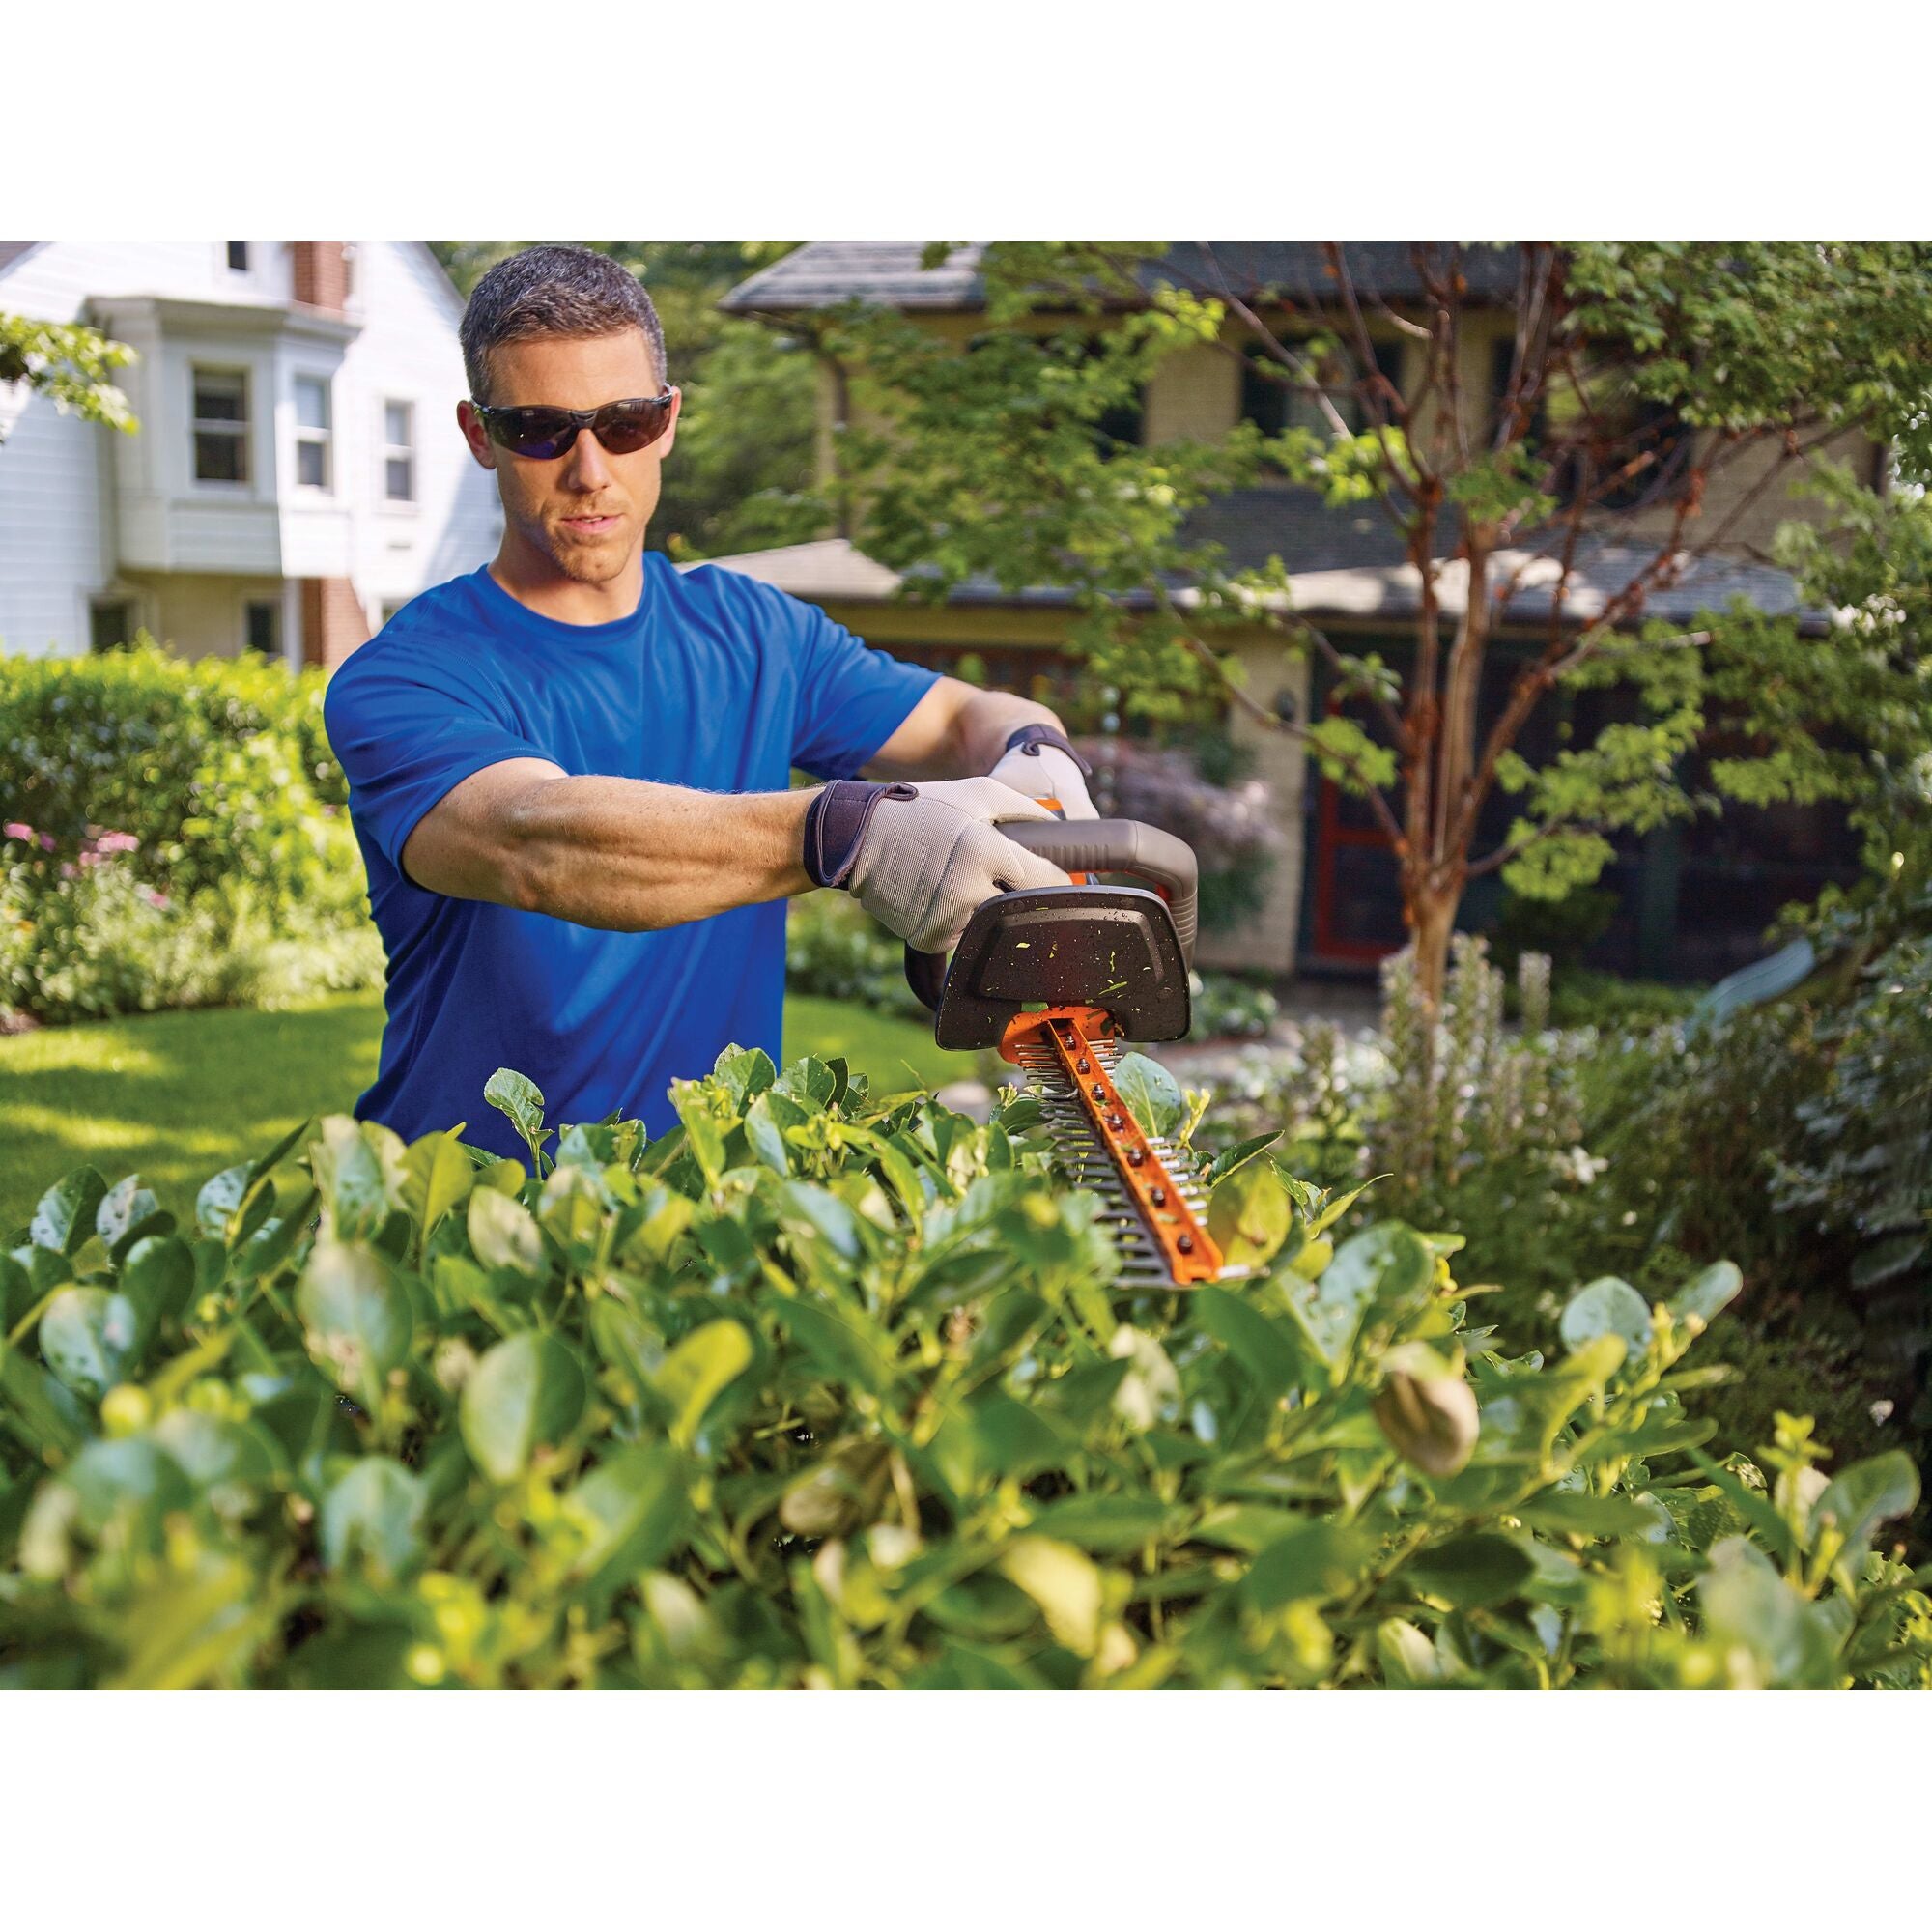 40V MAX* 24 In. Cordless Hedge Trimmer With Powerdrive, Tool Only |  BLACK+DECKER